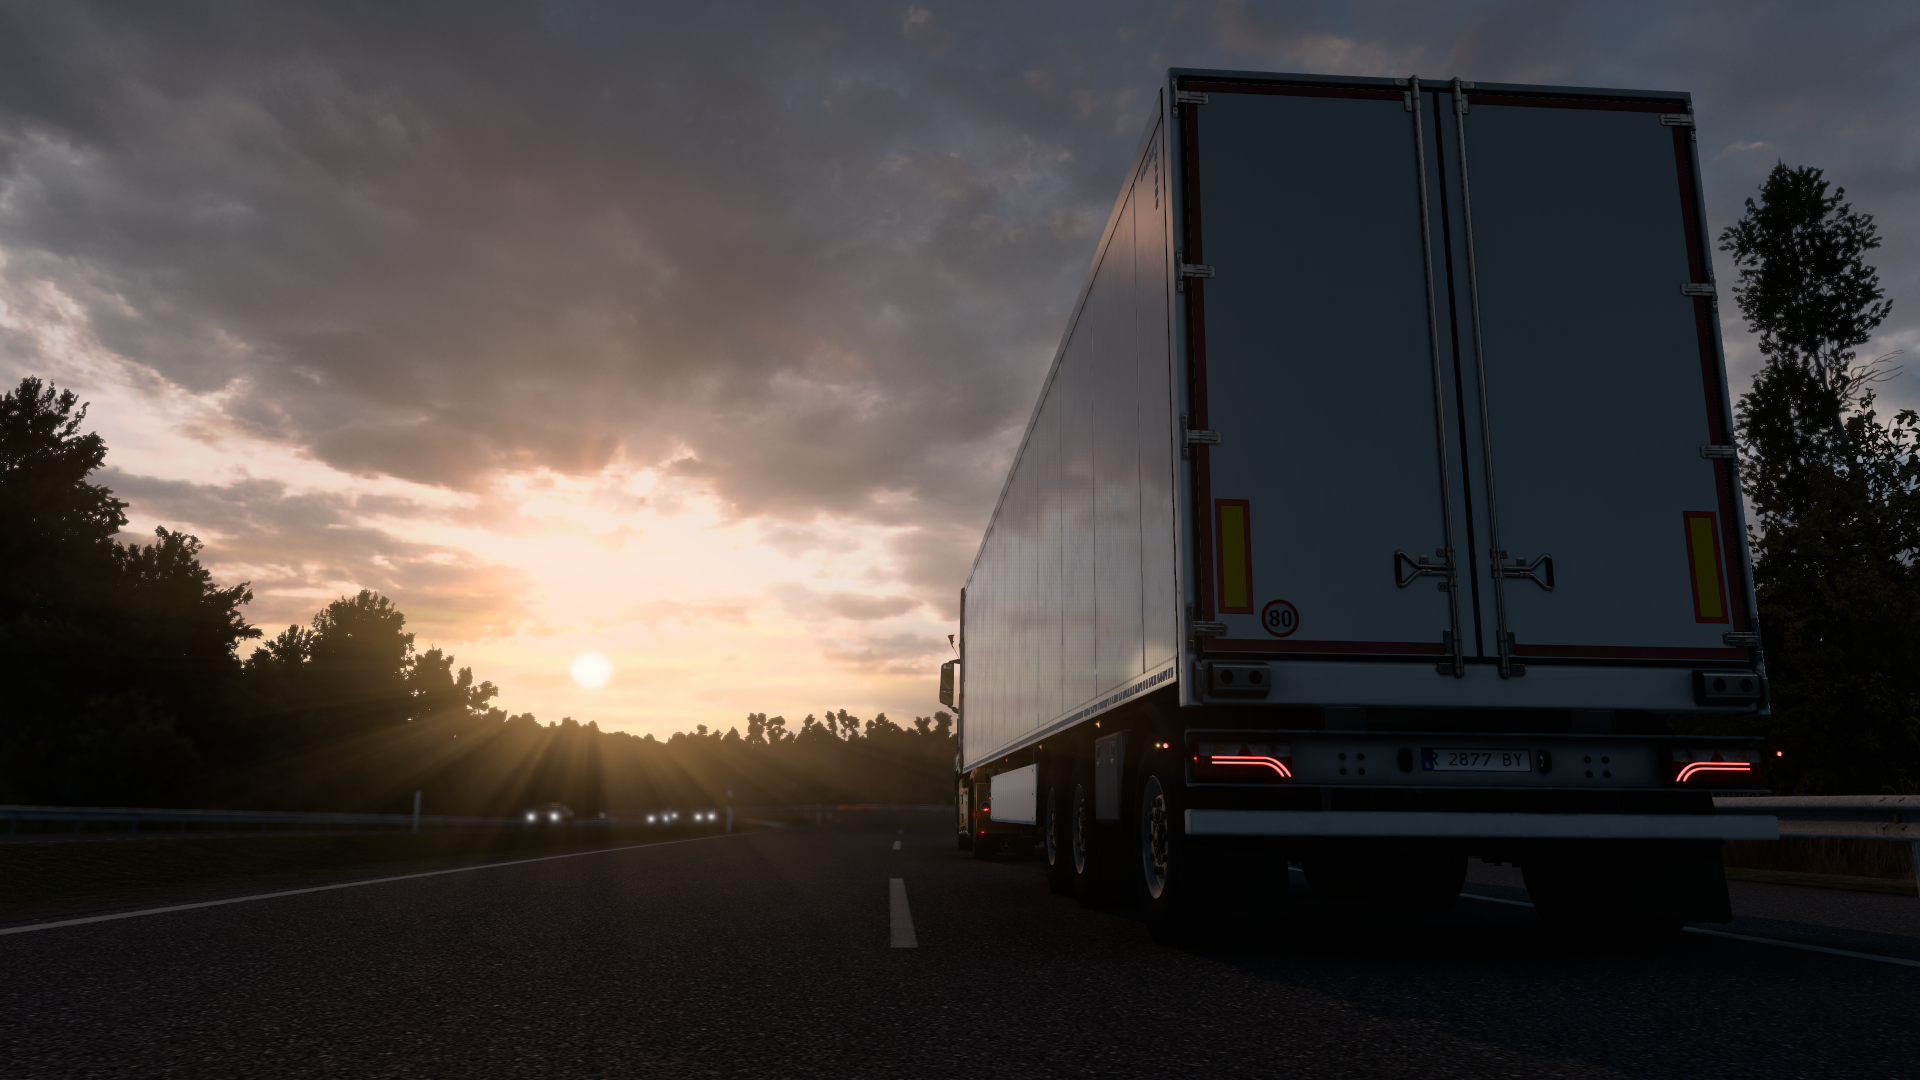 ets2_20210411_140252_00.png